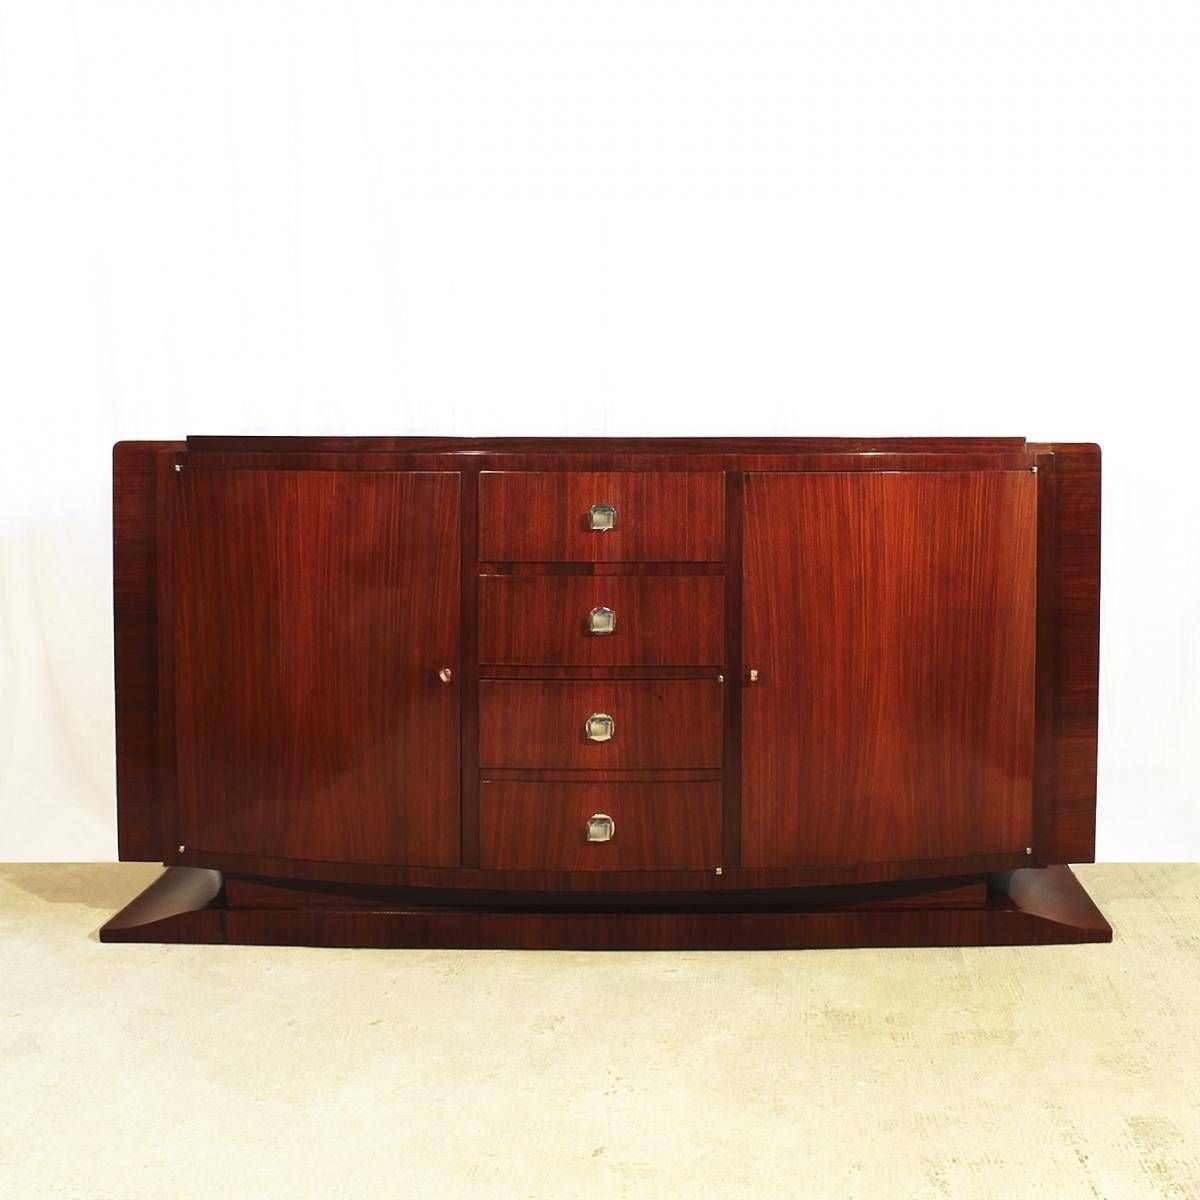 French Art Deco Mahogany & Rosewood Sideboard, 1930s For Sale At Inside Latest Art Deco Sideboards (View 7 of 15)